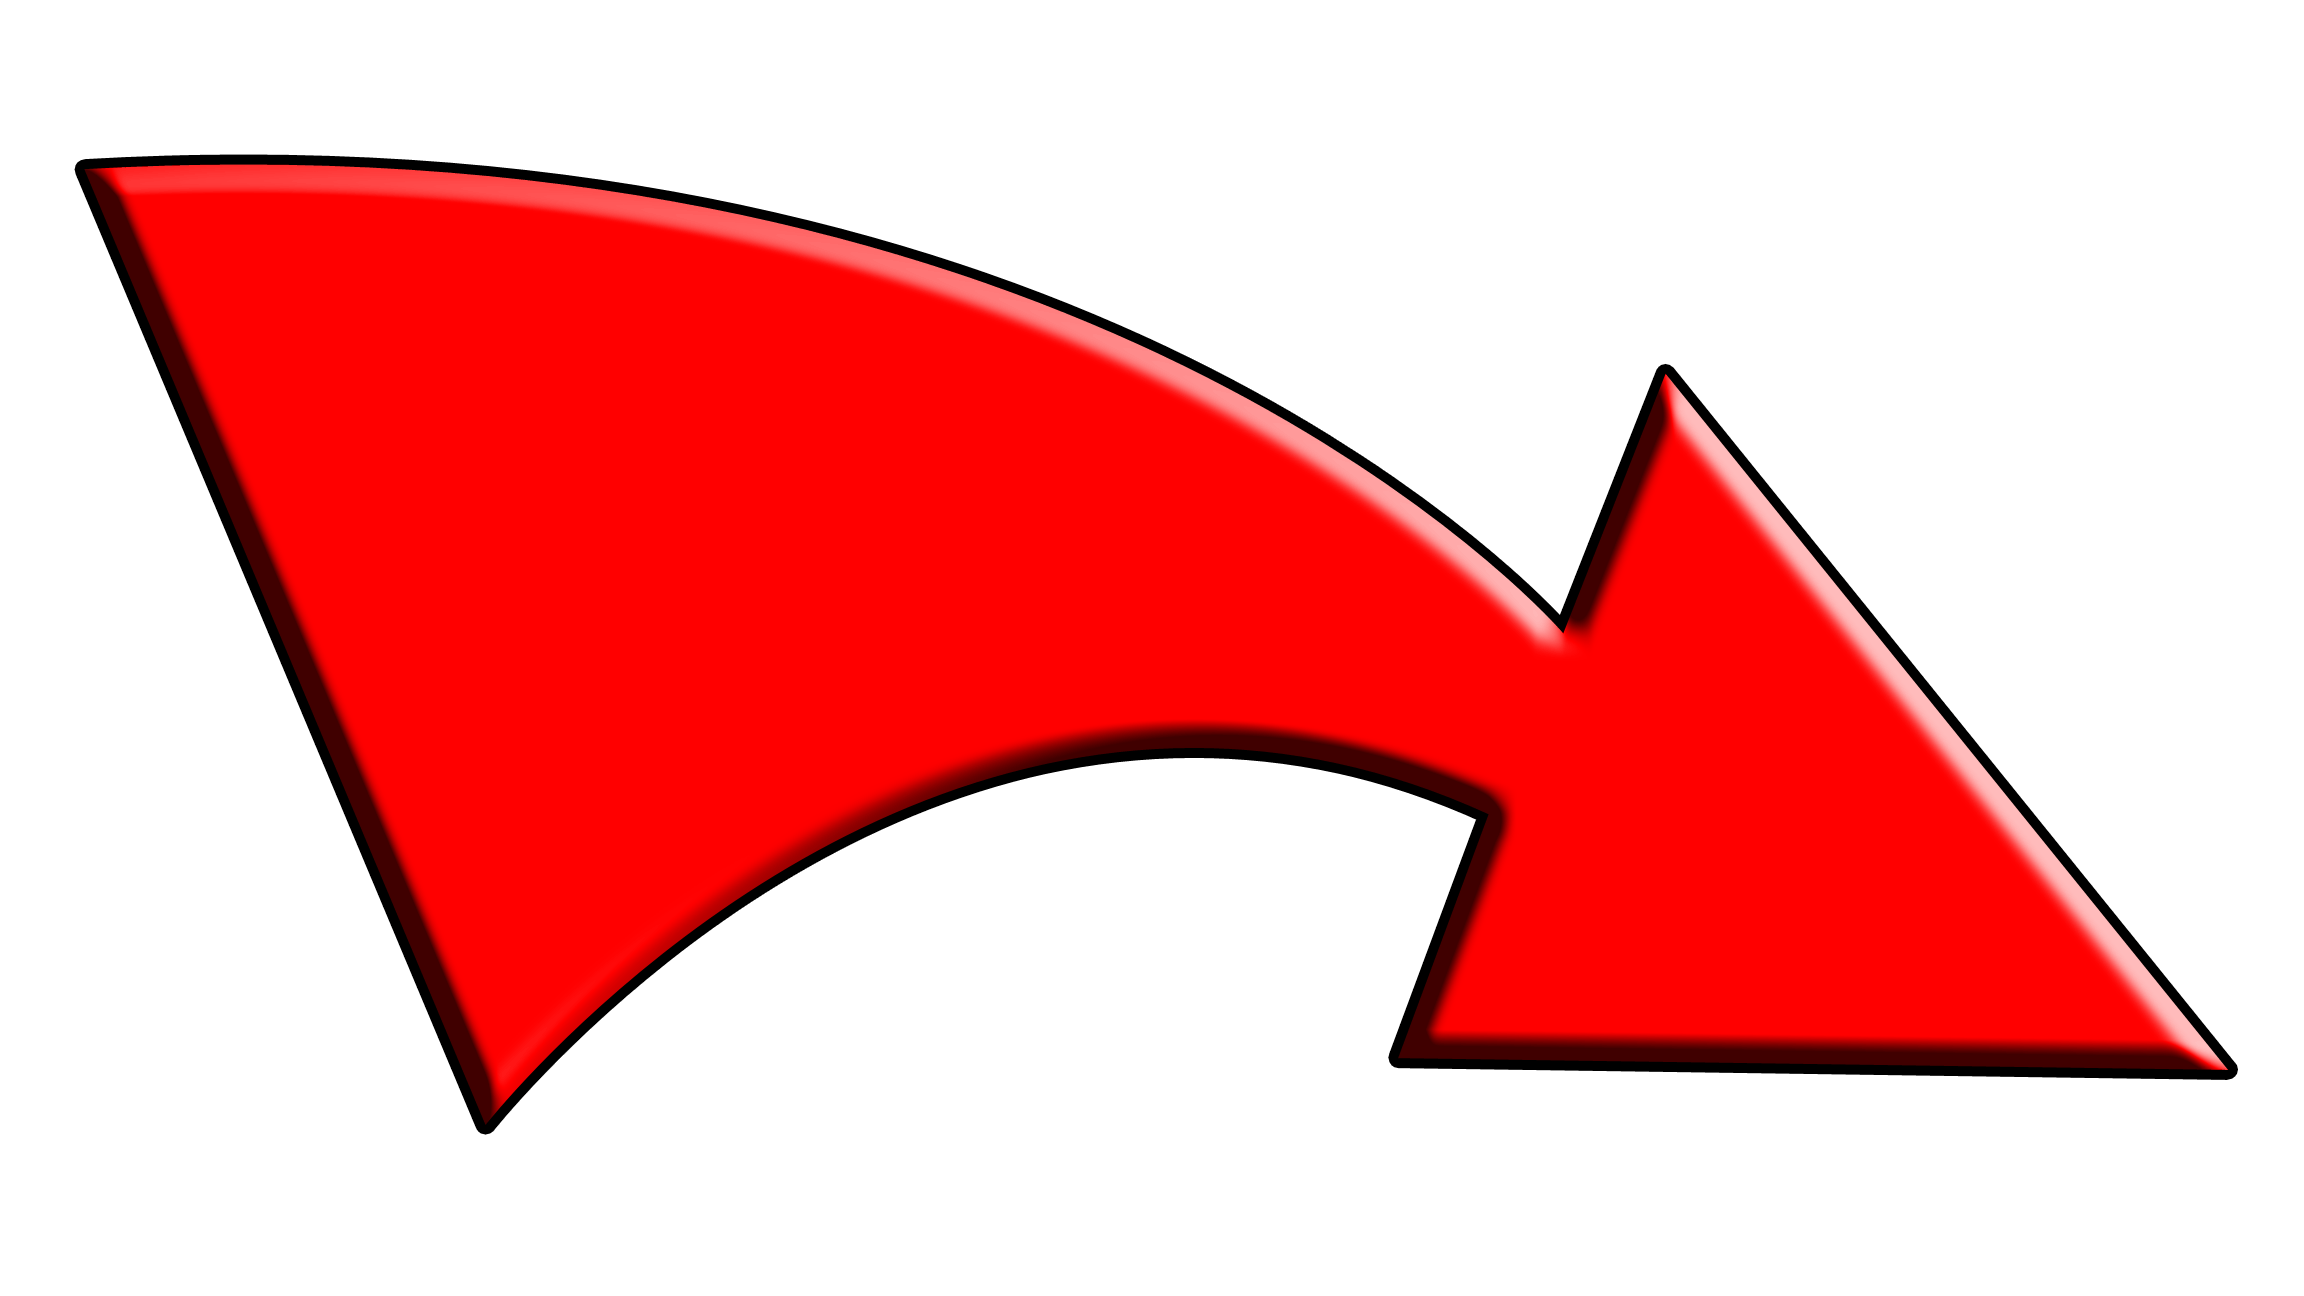 Diagonal Red Arrow Logo - Download Free Red Arrow PNG Images - Free Icons and PNG Backgrounds